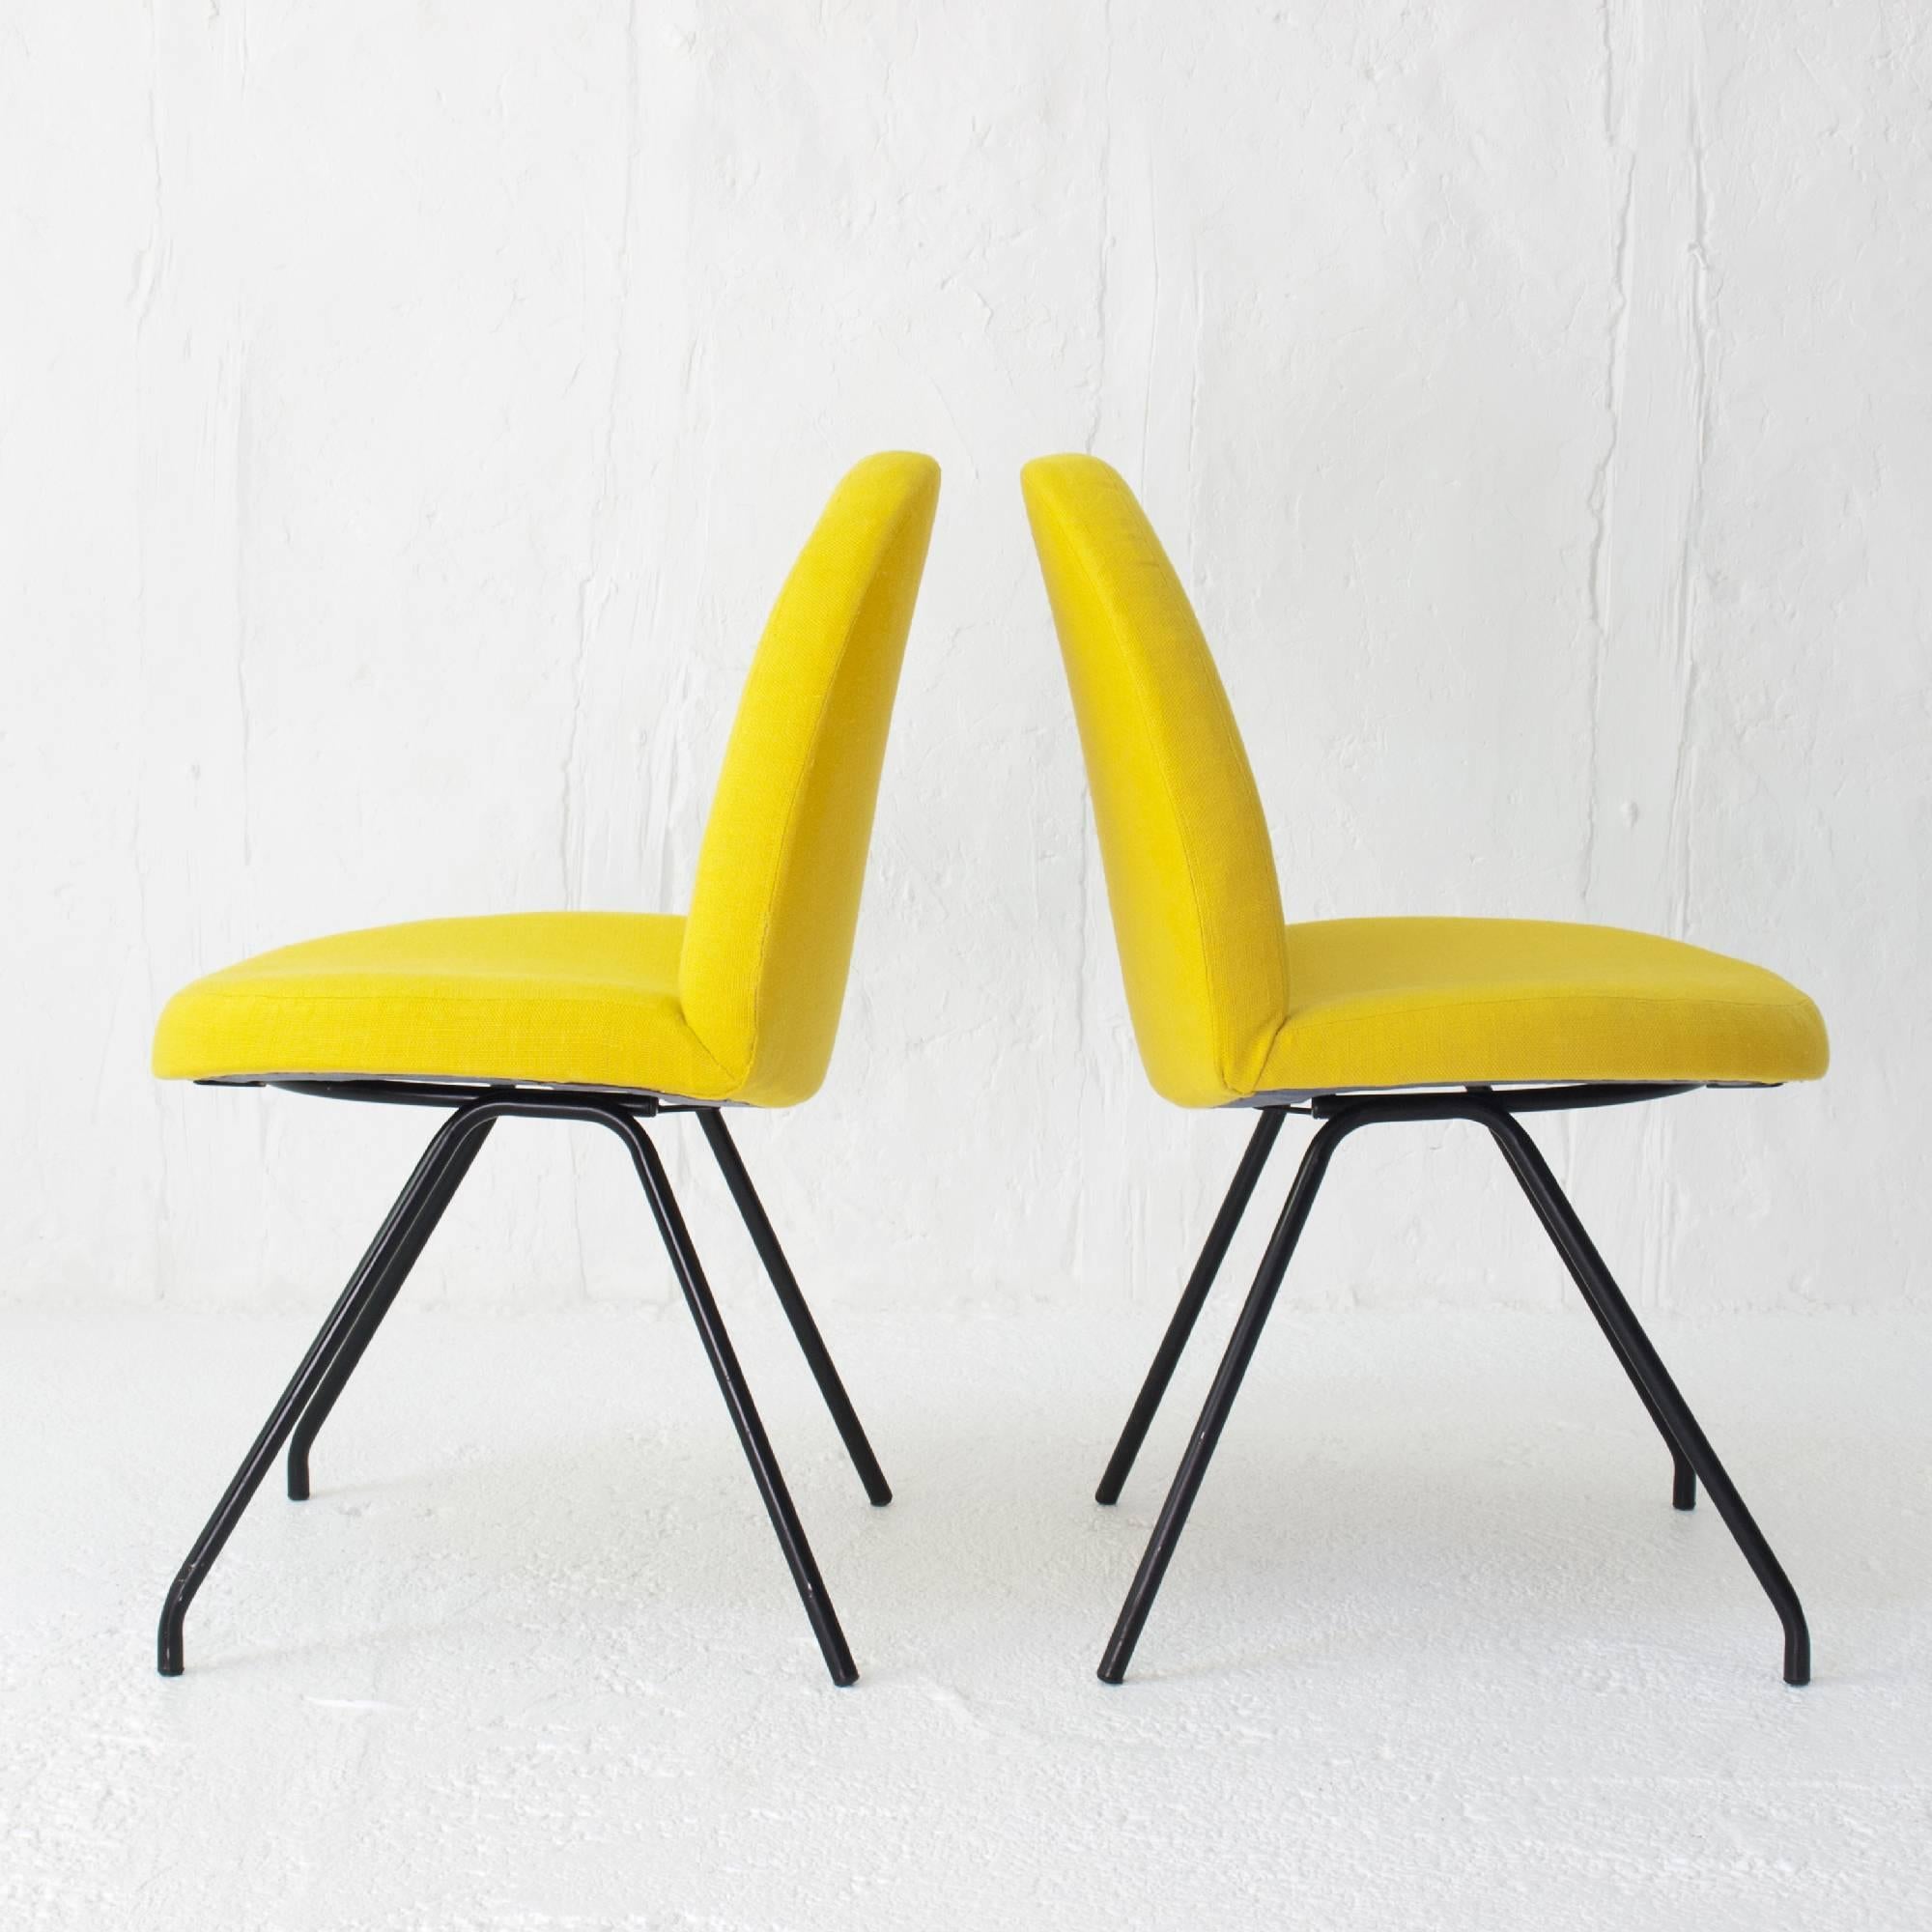 Mid-20th Century Joseph-André Motte Pair of Chairs 771 for Steiner